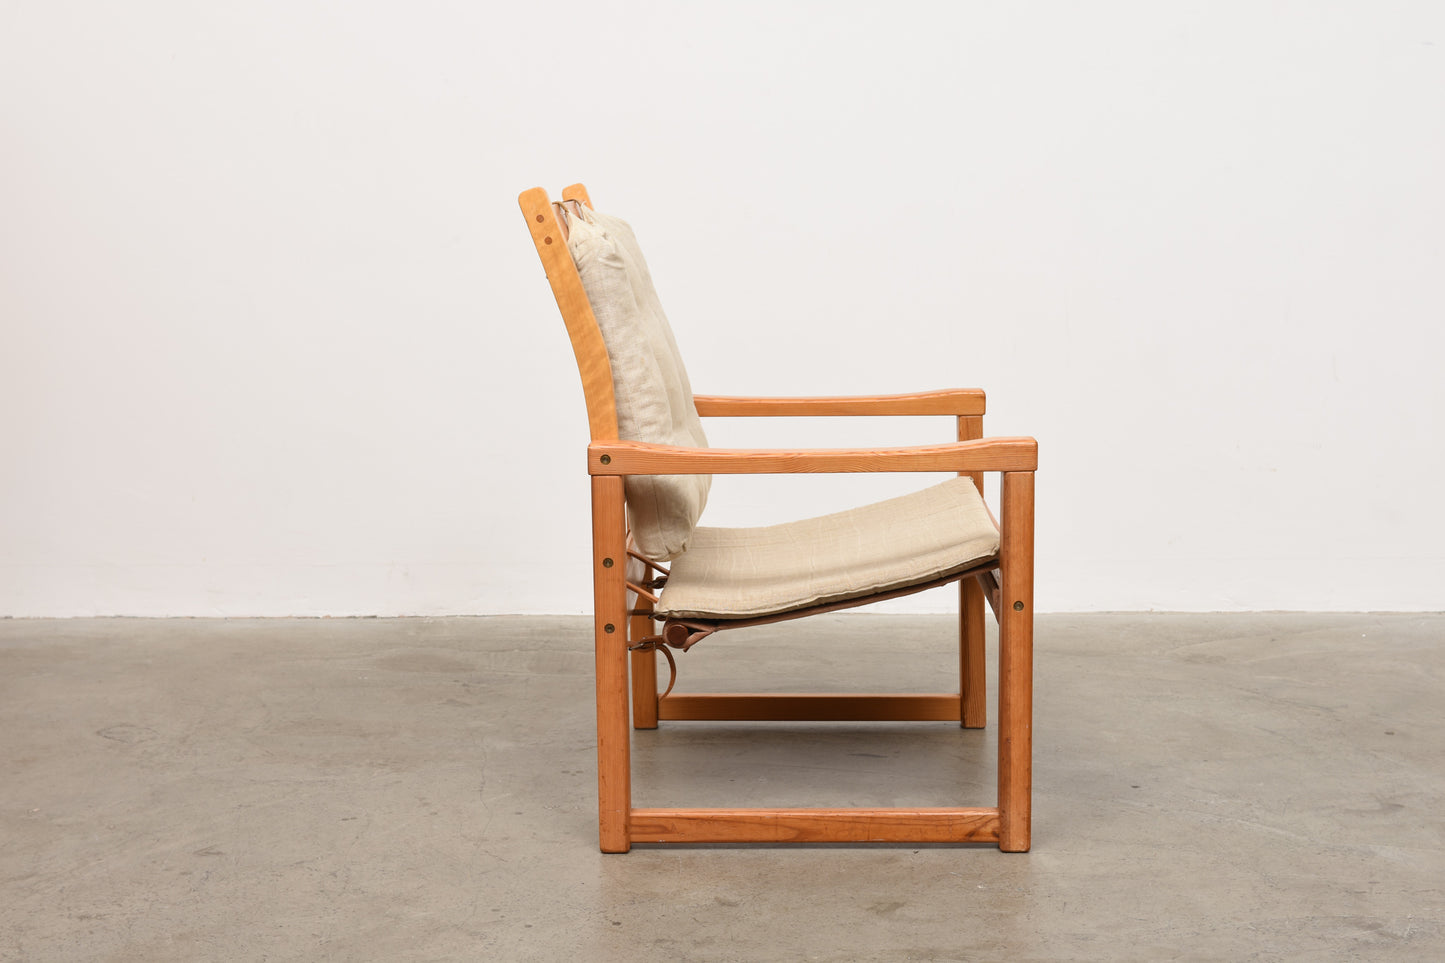 1970s 'Diana' lounger by Karin Möbring